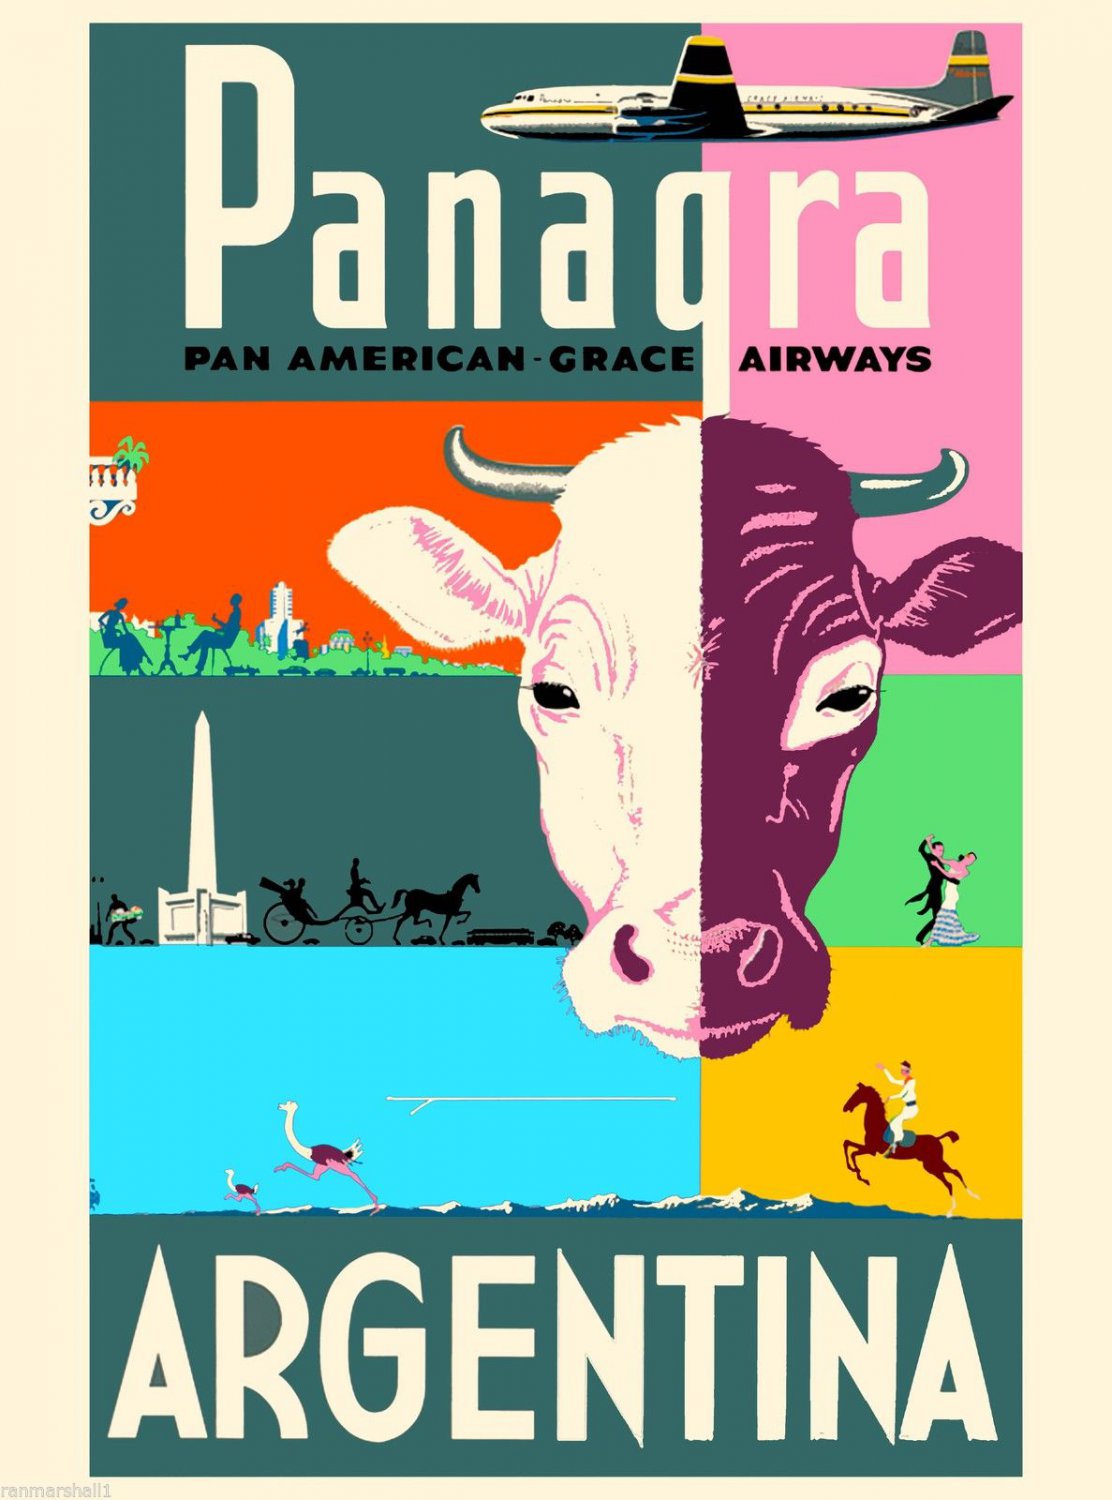 Panagra, Argentina Travel Poster 13x19 inches